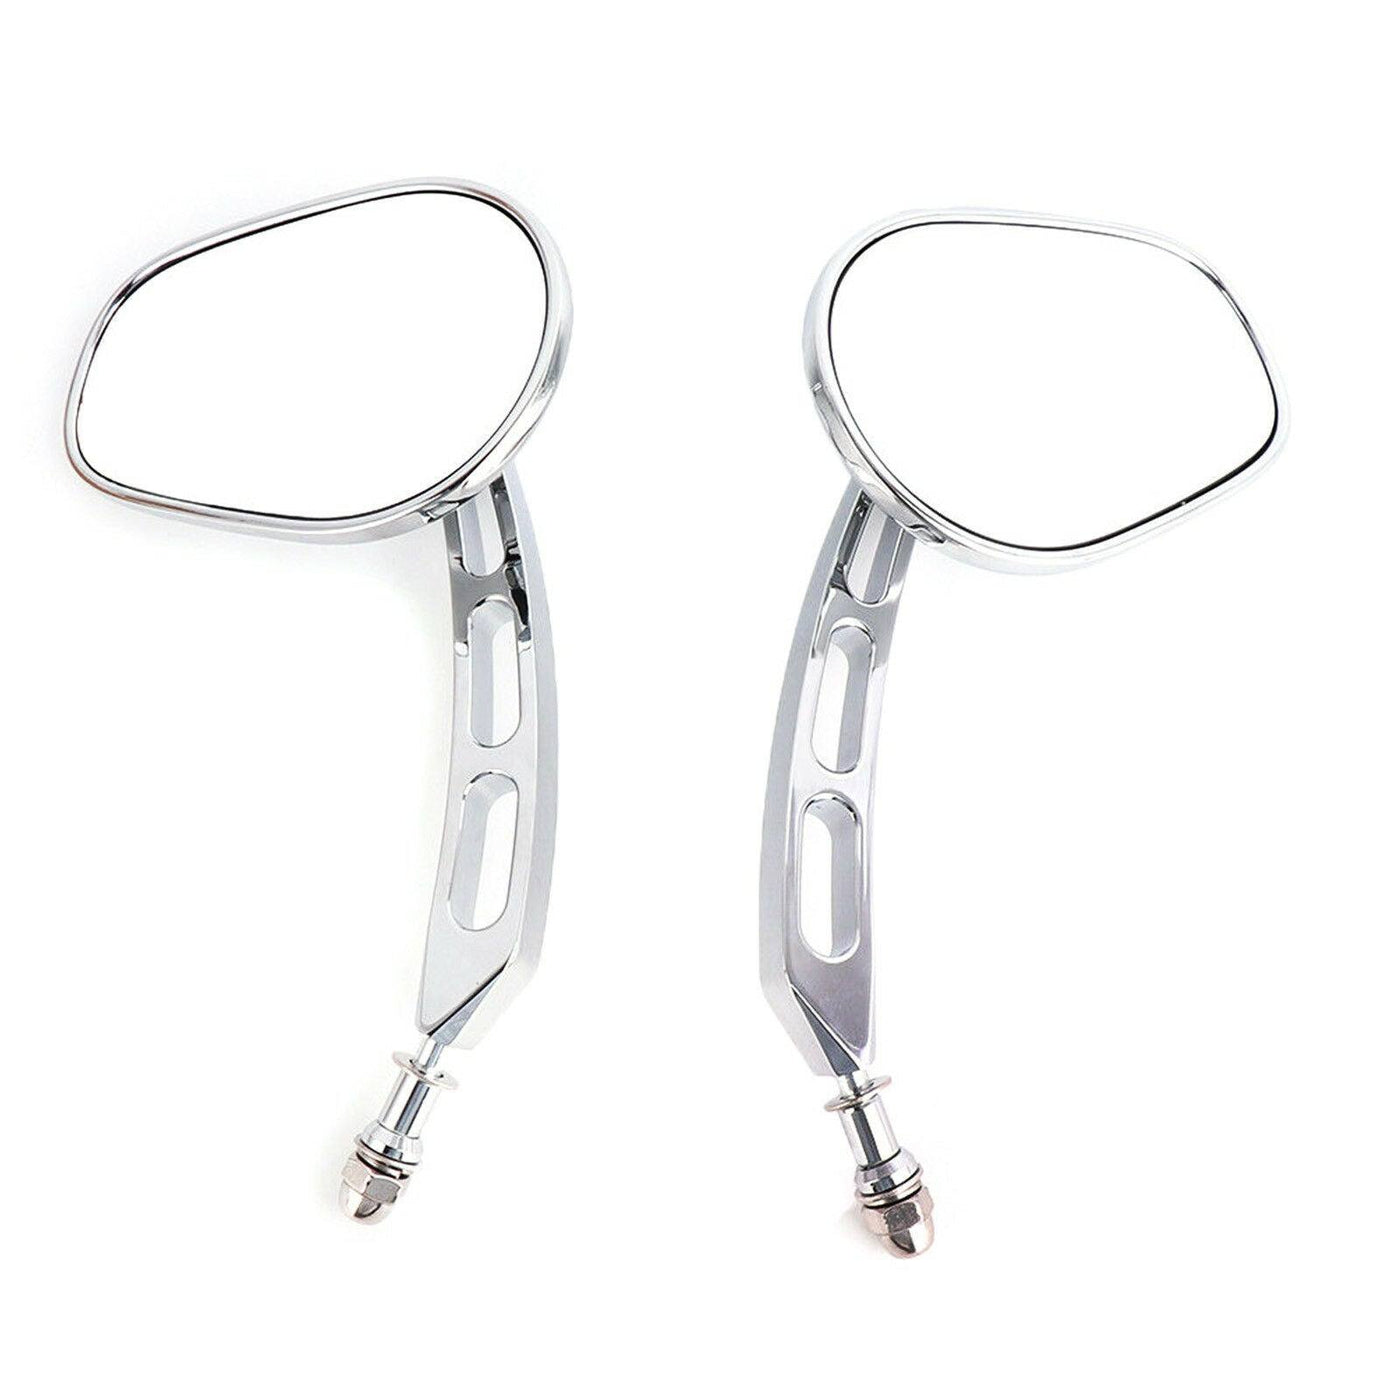 For Harley Davidson Electra Glide Classic Chrome Rear View Side Mirrors Custom - Moto Life Products